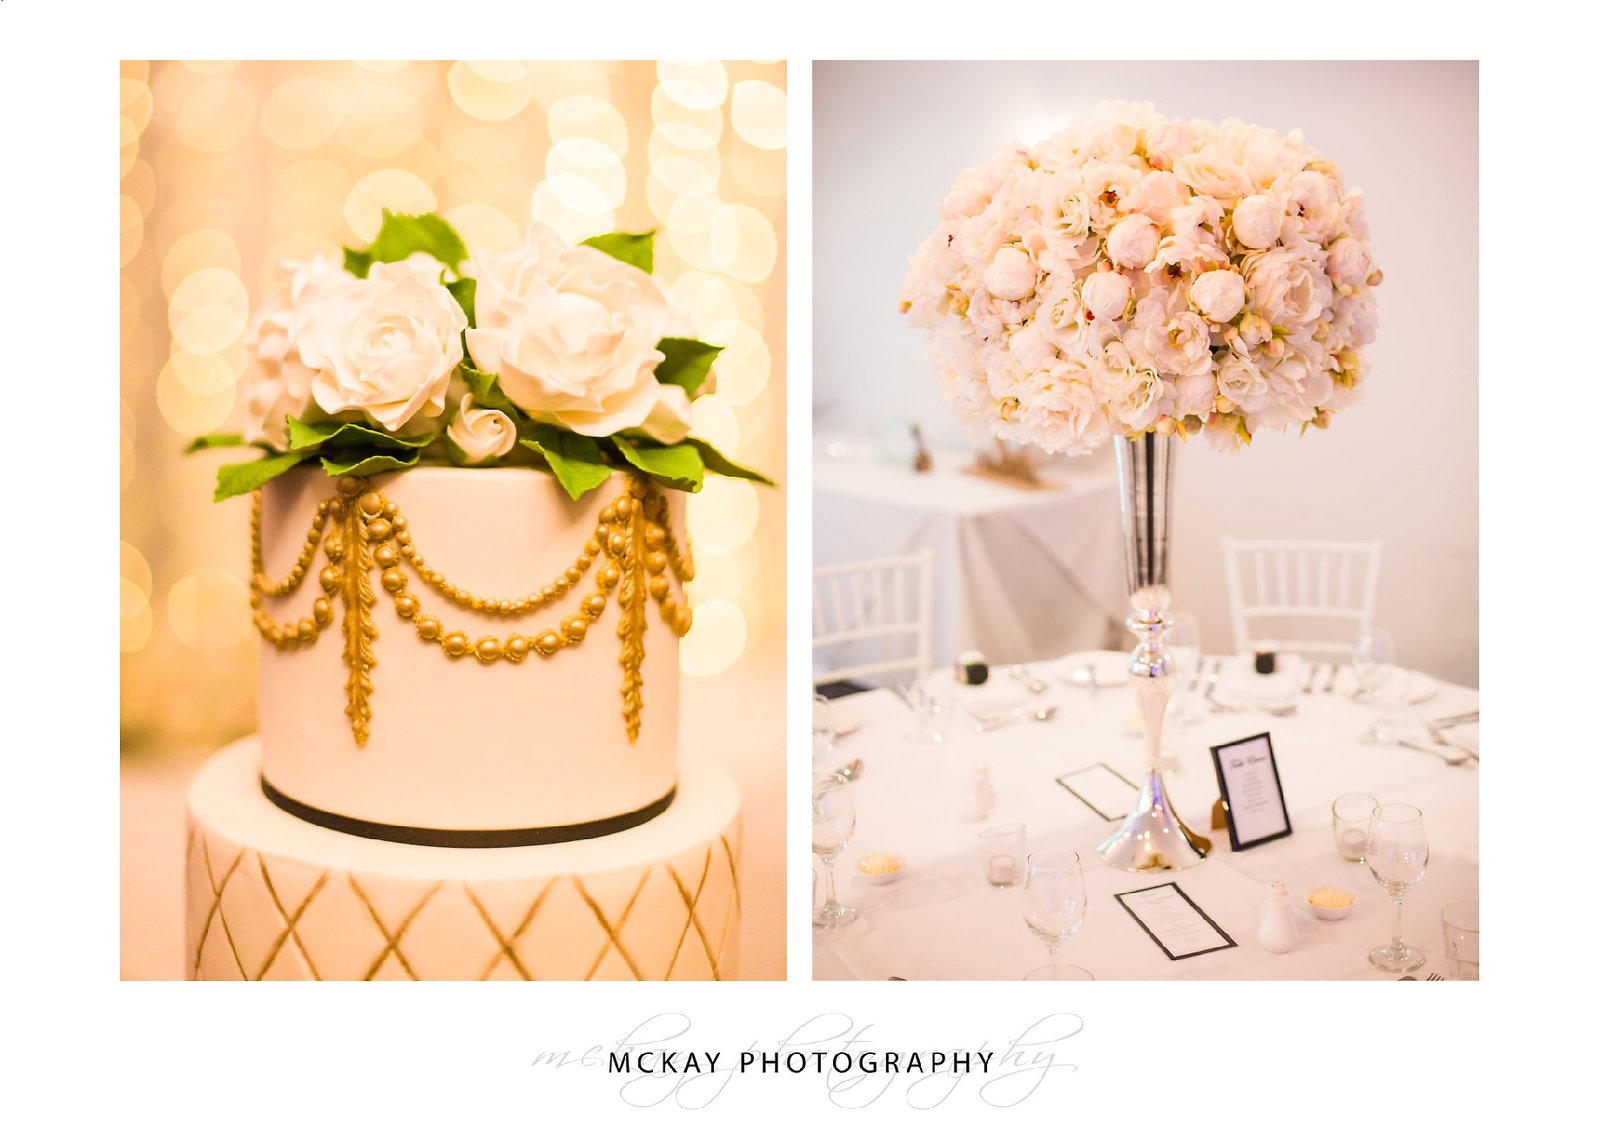 Wedding cake and room details